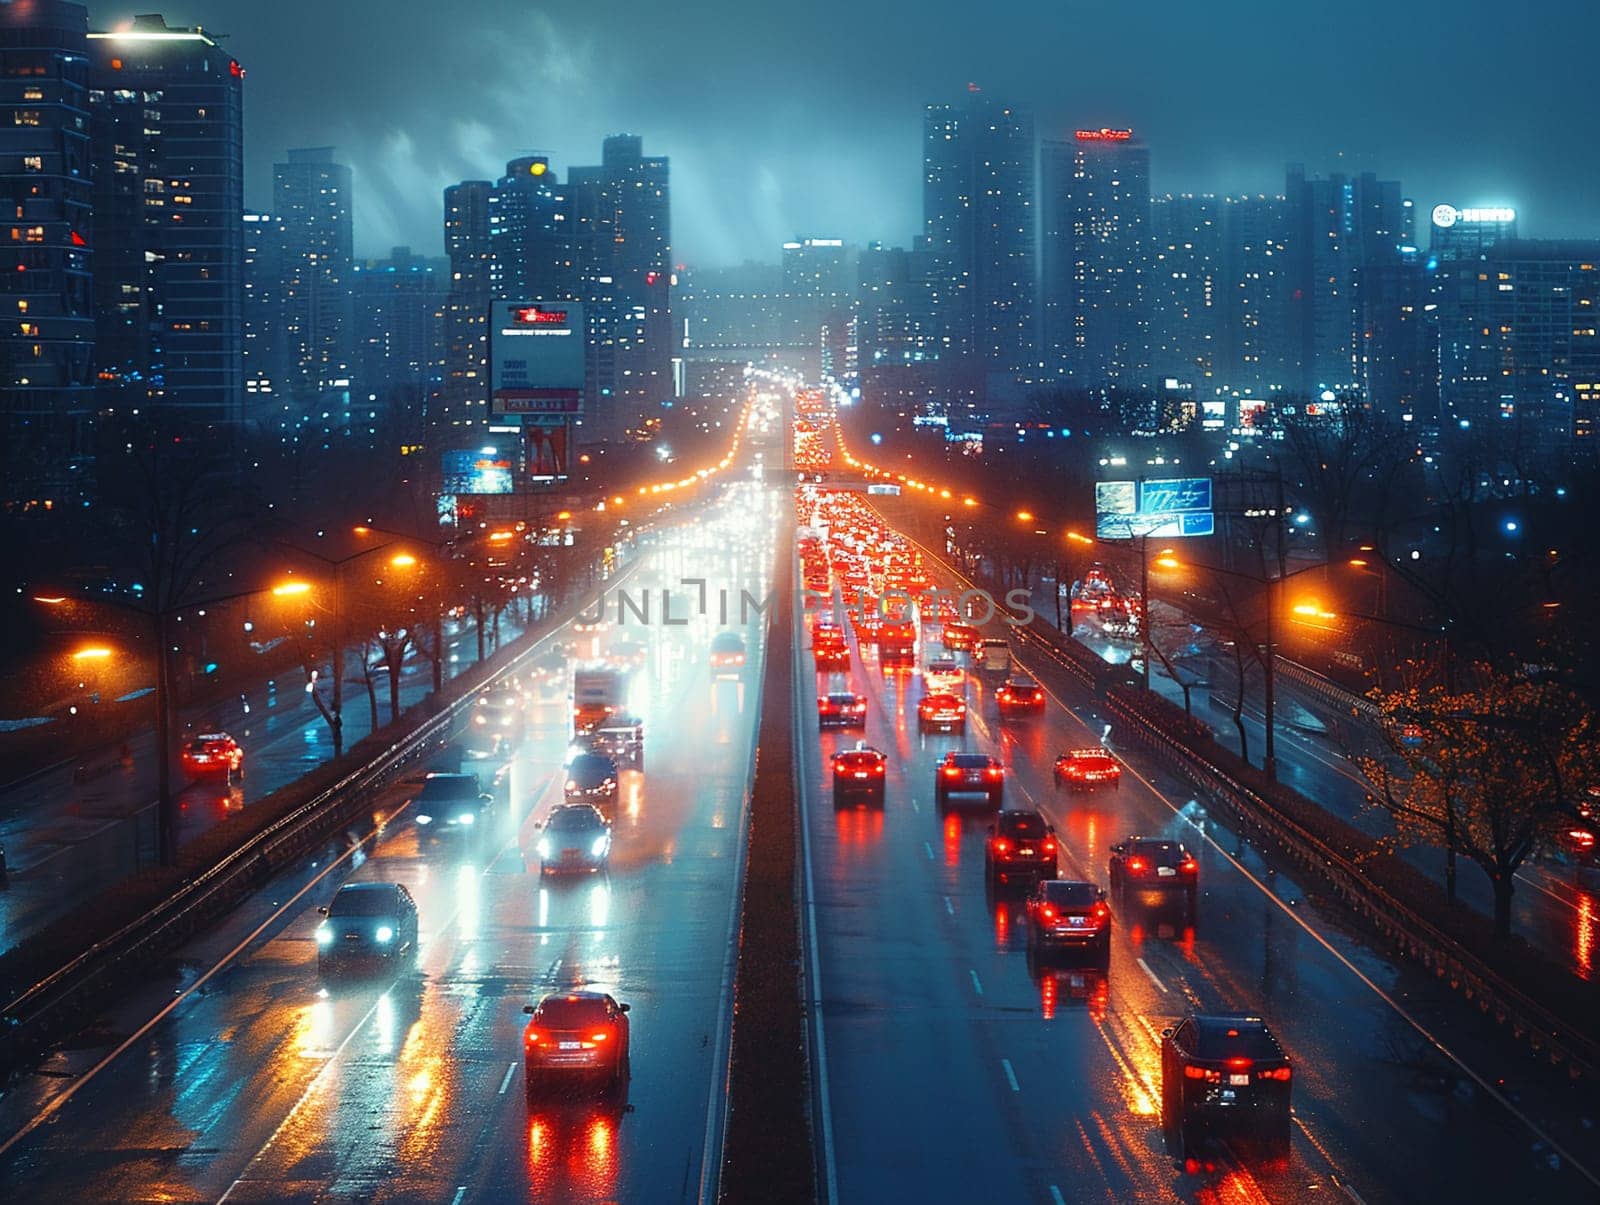 Nighttime City Traffic with Streaks of Headlights and Streetlights, The motion blur of lights suggests the pulse and flow of urban life after dark.